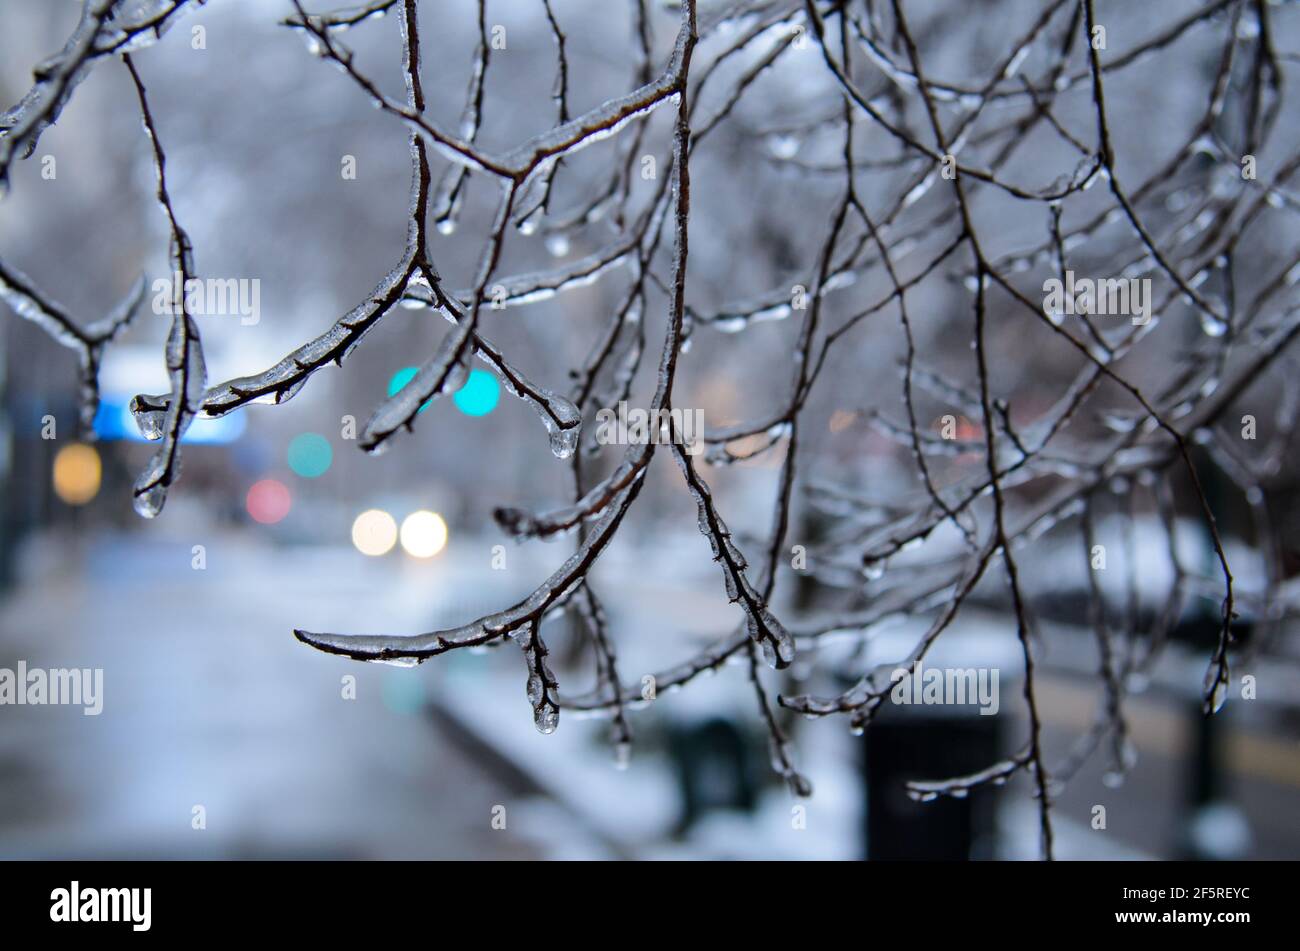 A frozen tree with coloured lights in the background during an ice storm in Richmond, Virginia, USA Stock Photo